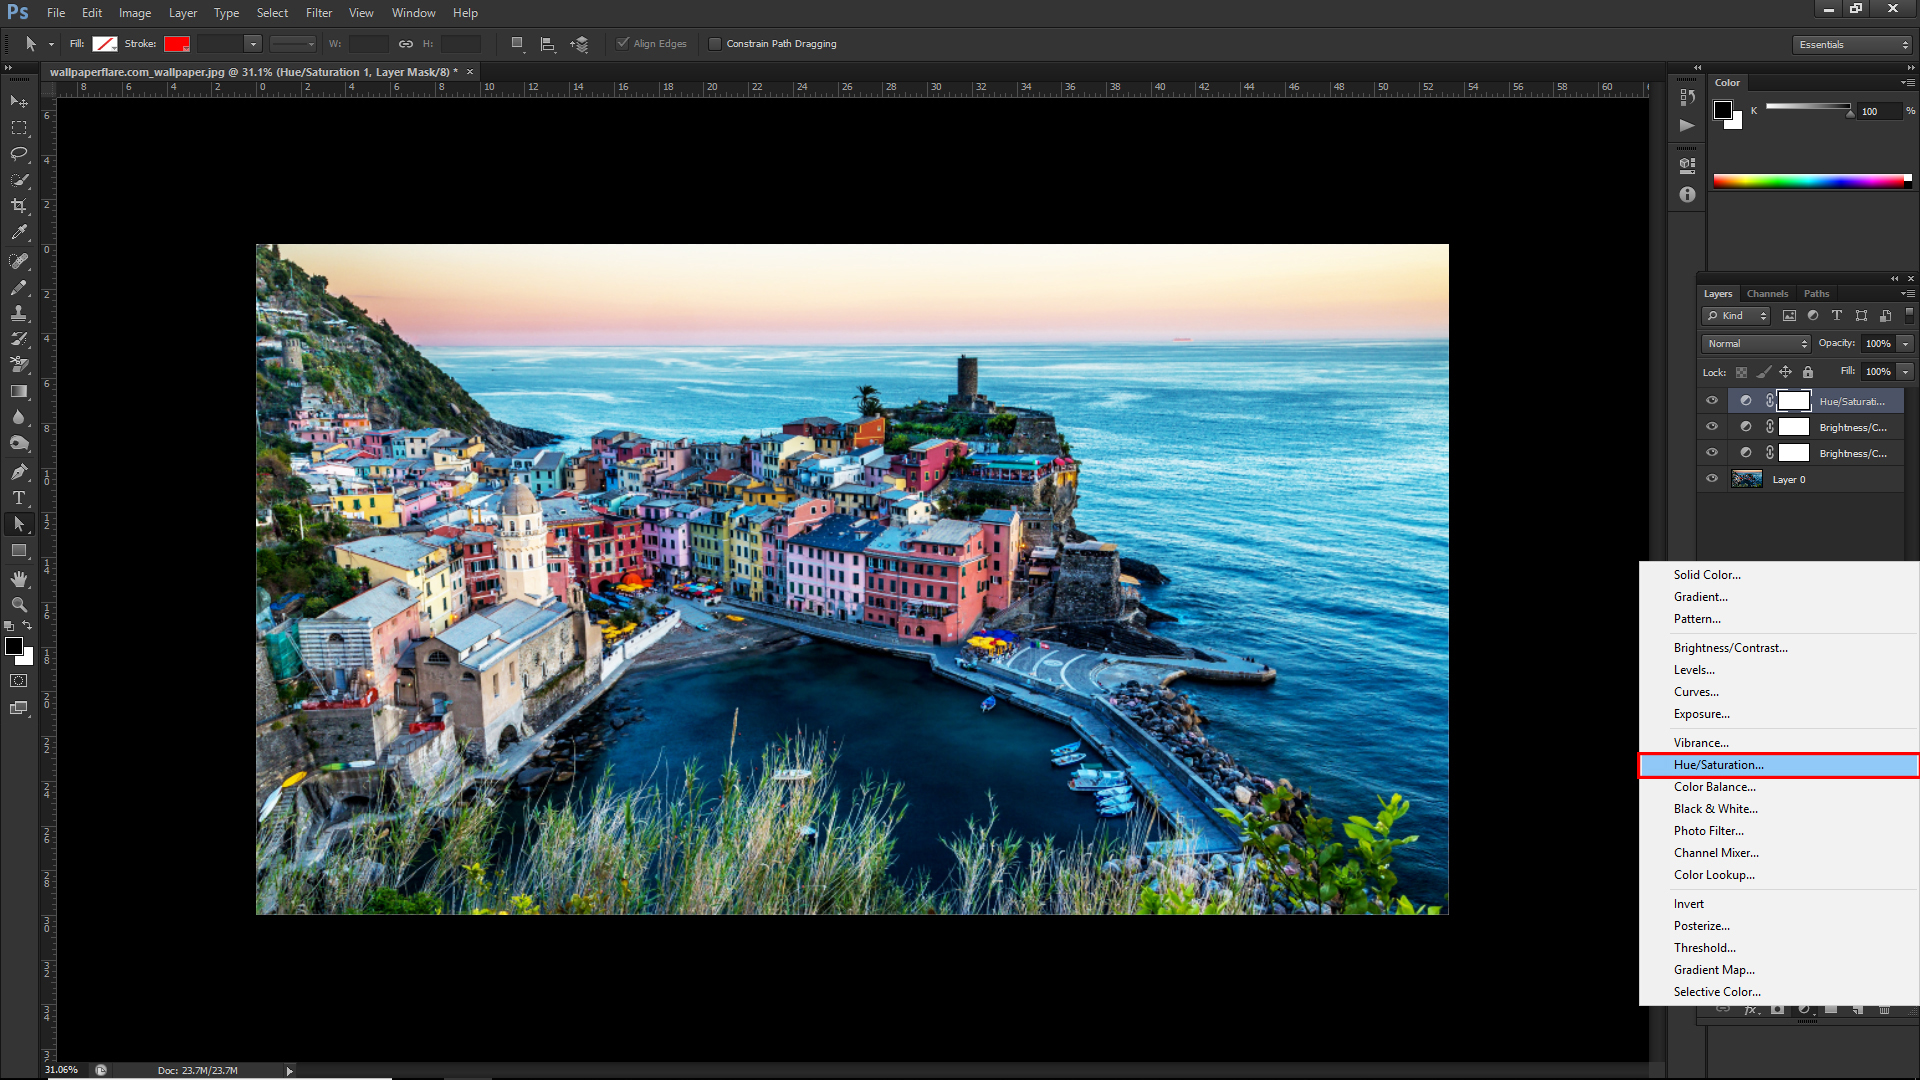 How to increase the brightness and contrast of your photos in Photoshop(creativea2z)